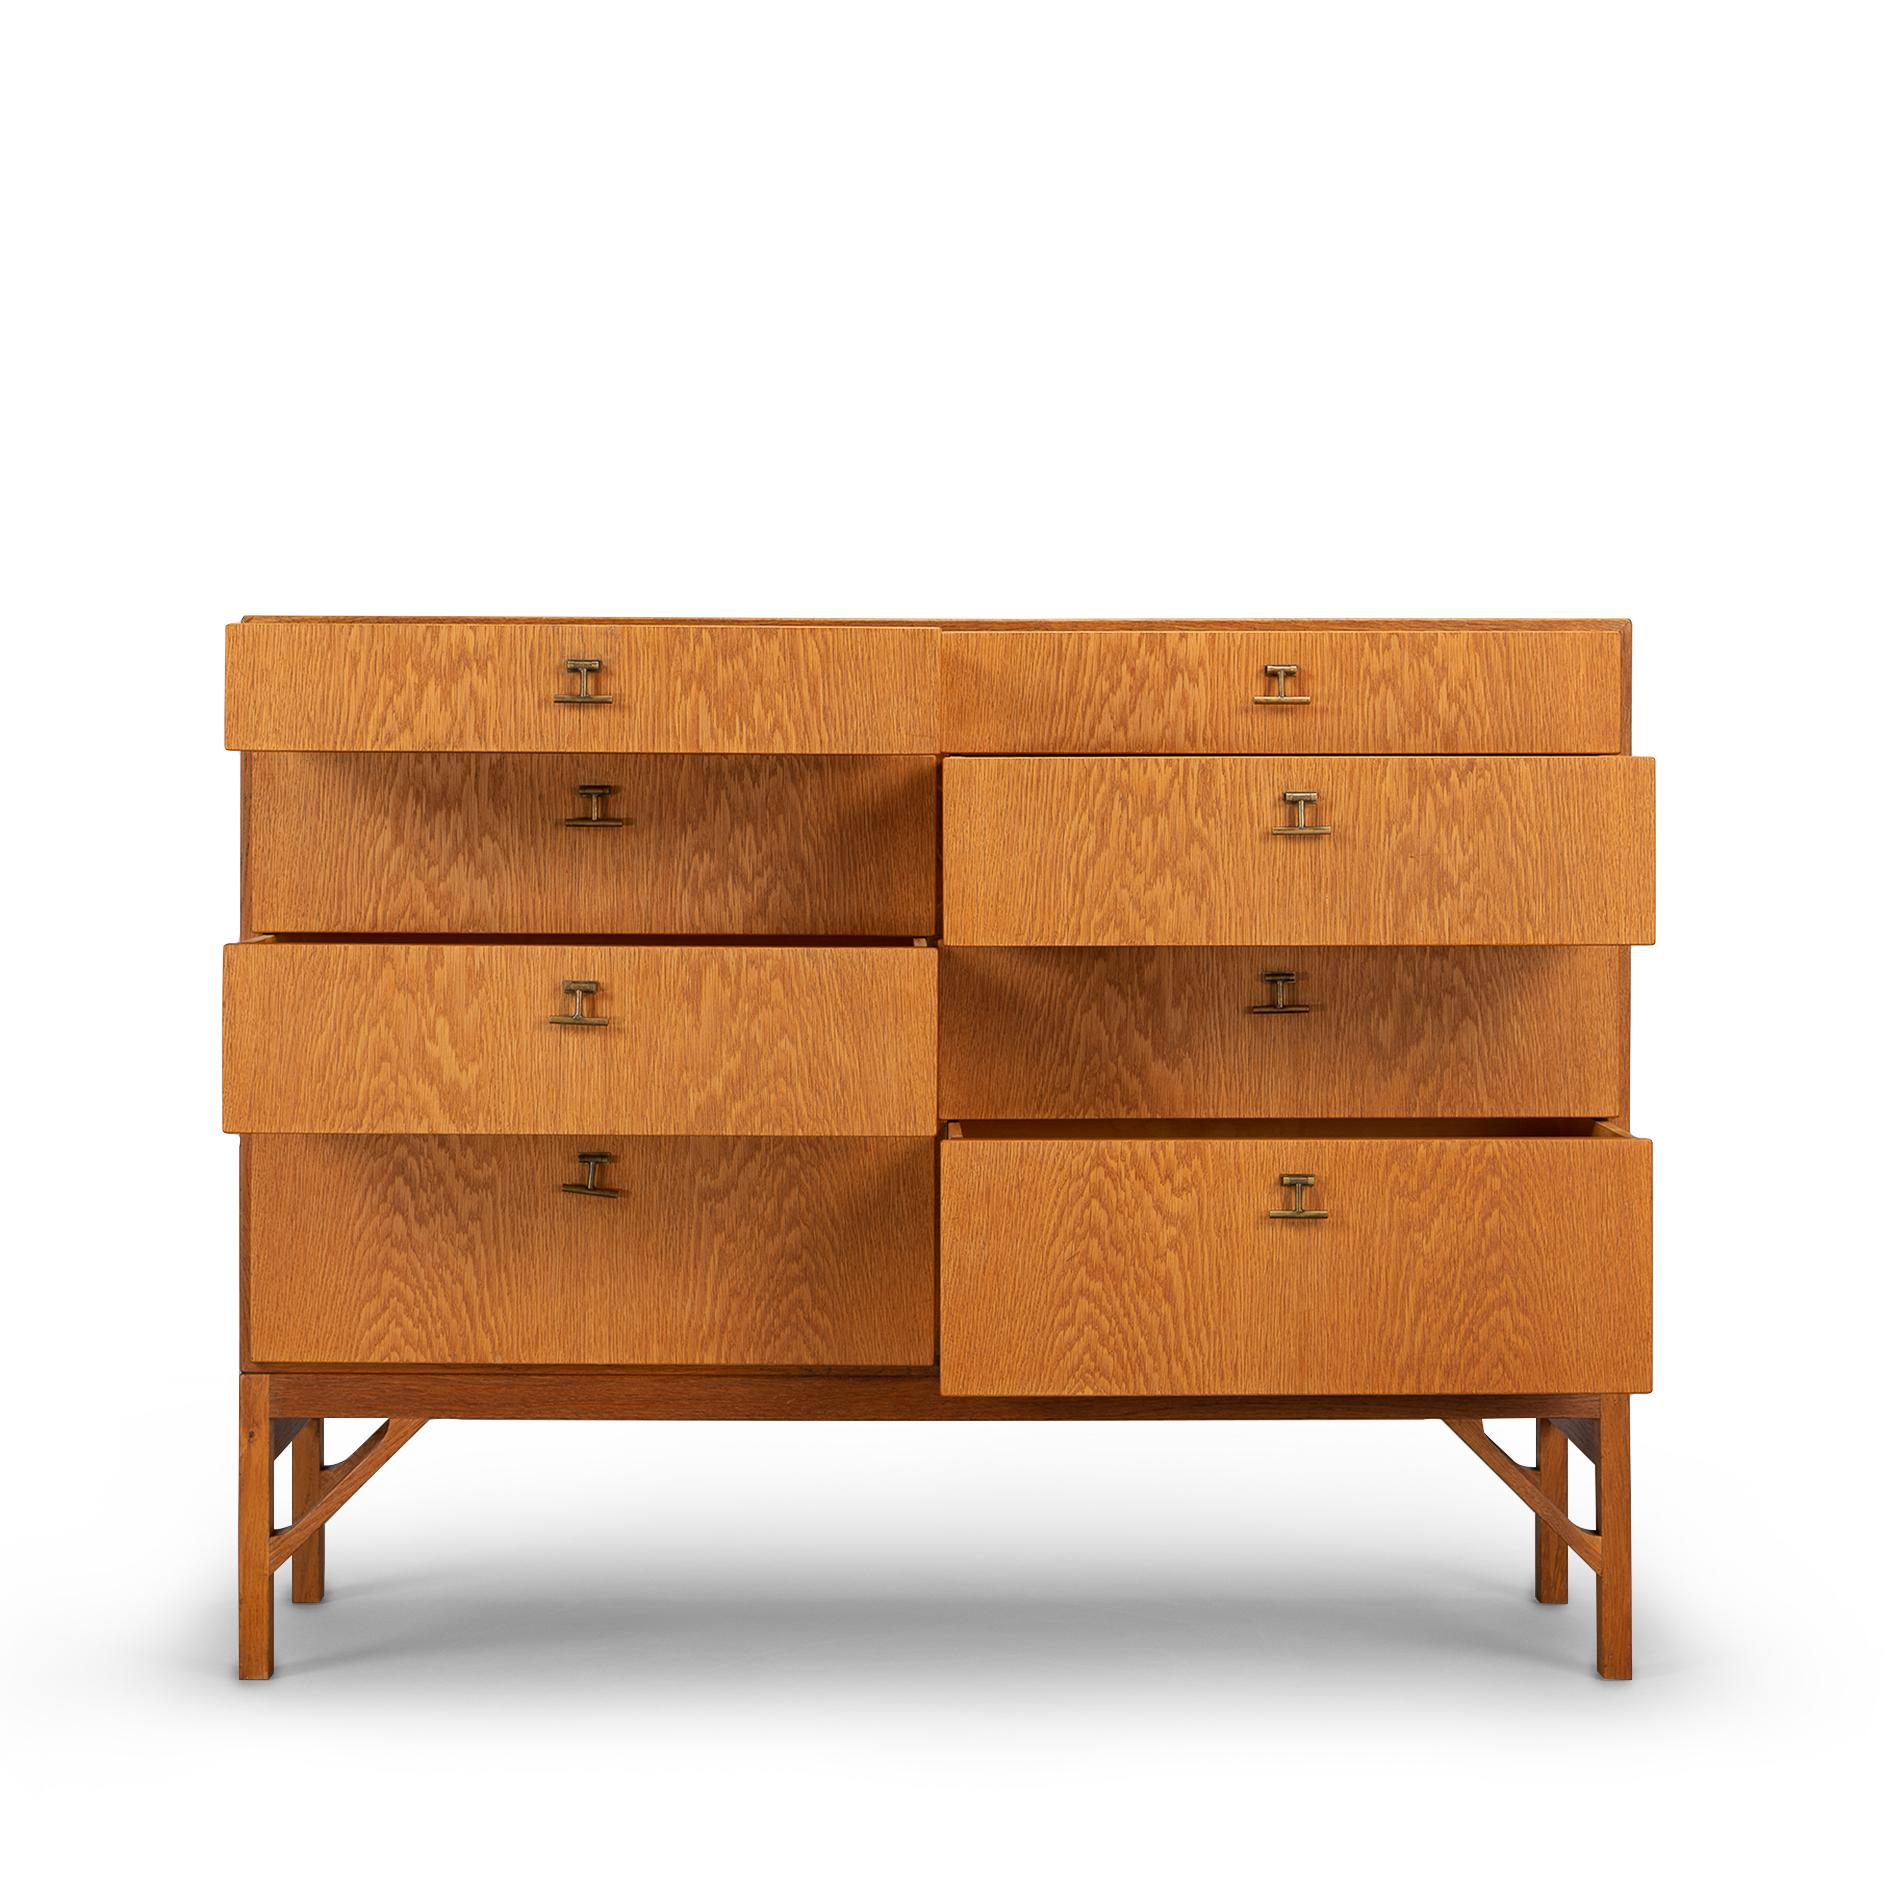 Rare and well crafted Børge Mogensen chest of drawers No. 234 manufactured by FDB Møbler as part of his China series in the 1960s. Very robust design made in high quality. This spacious chest of drawers is in a good vintage condition and has all